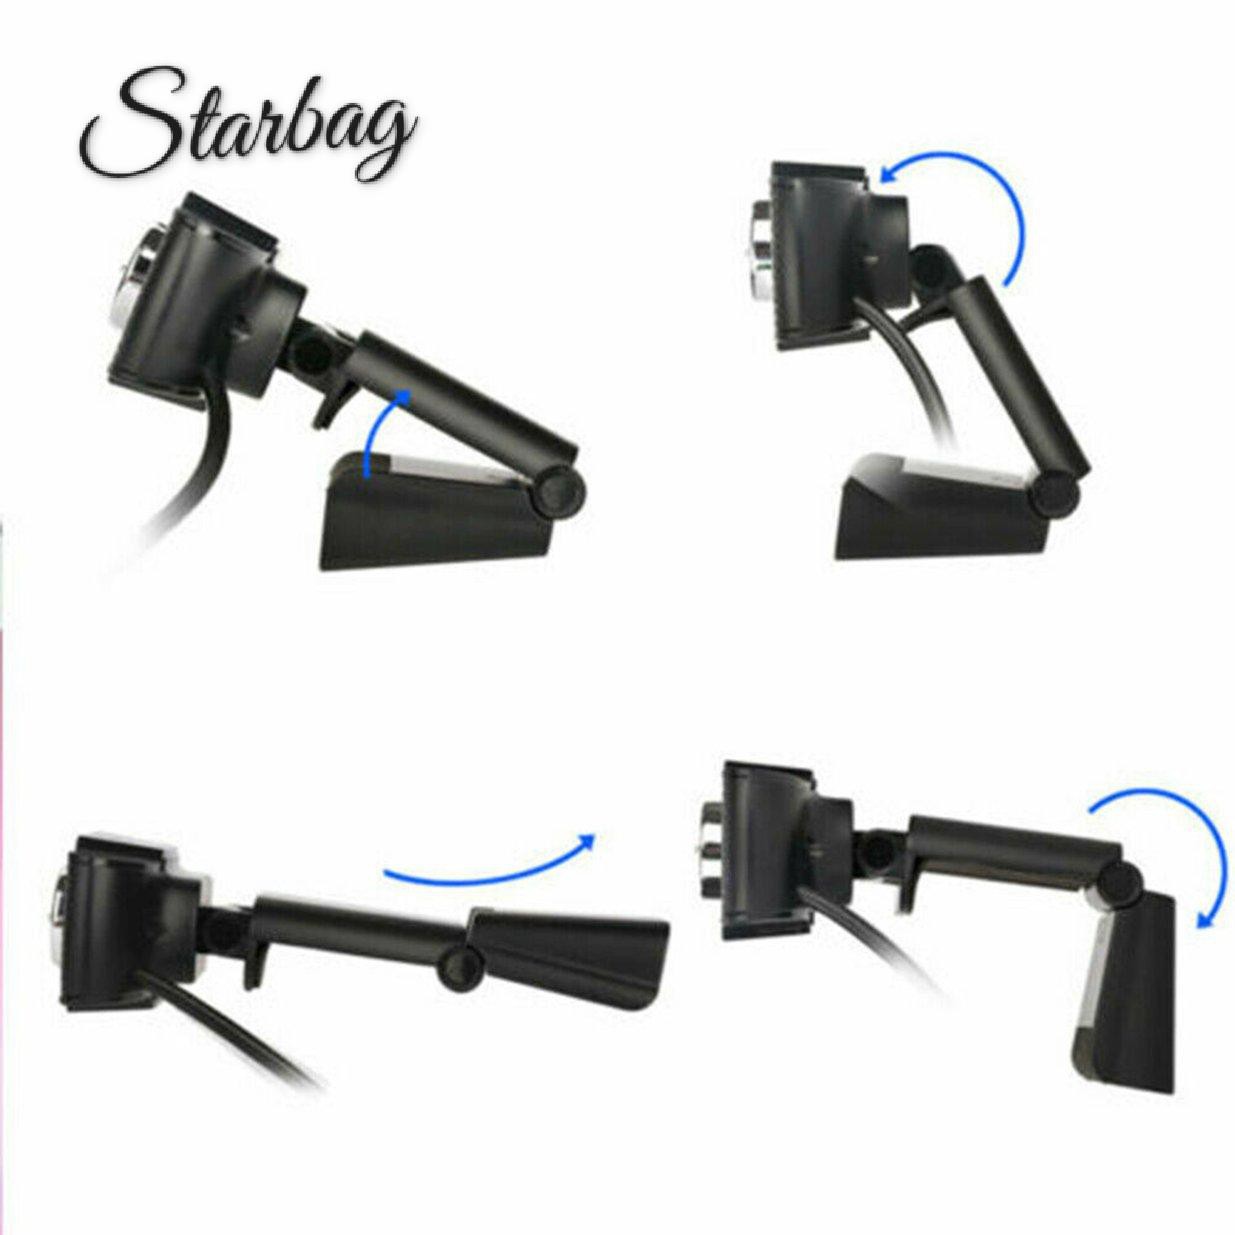 [star] HD USB camera Built-in noise reduction microphone White light design Broadly compatible Auto focus Plug and play